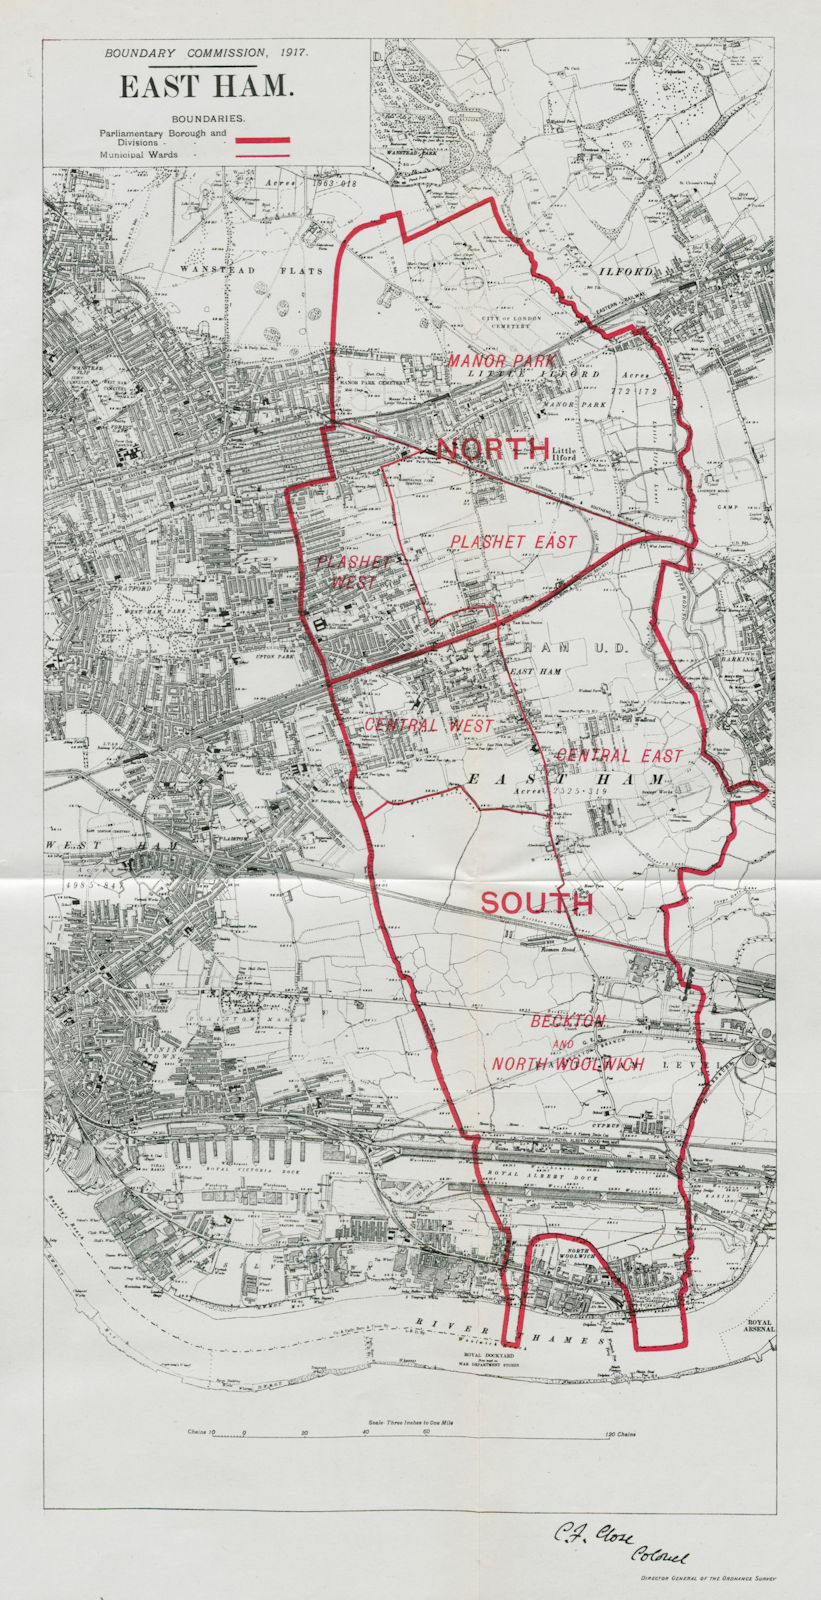 East Ham Parliamentary Borough. Beckton Woolwich. BOUNDARY COMMISSION 1917 map